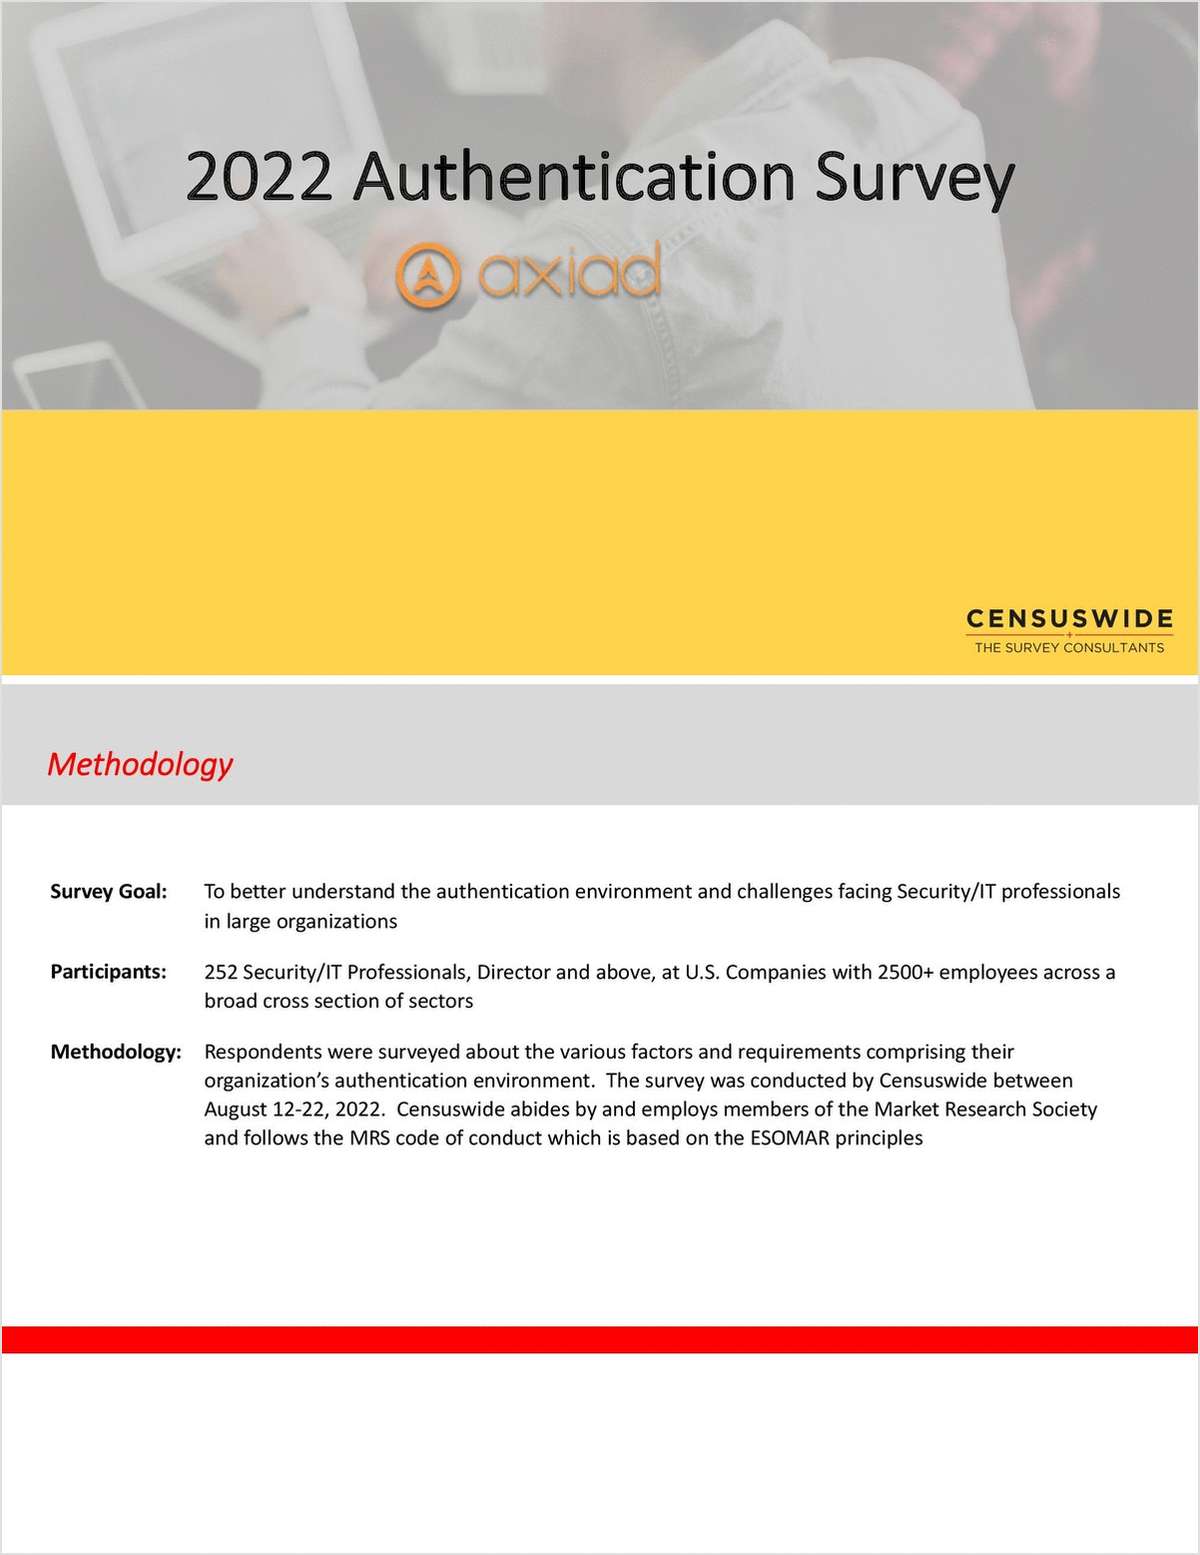 The 2022 Authentication Survey Results Revealed